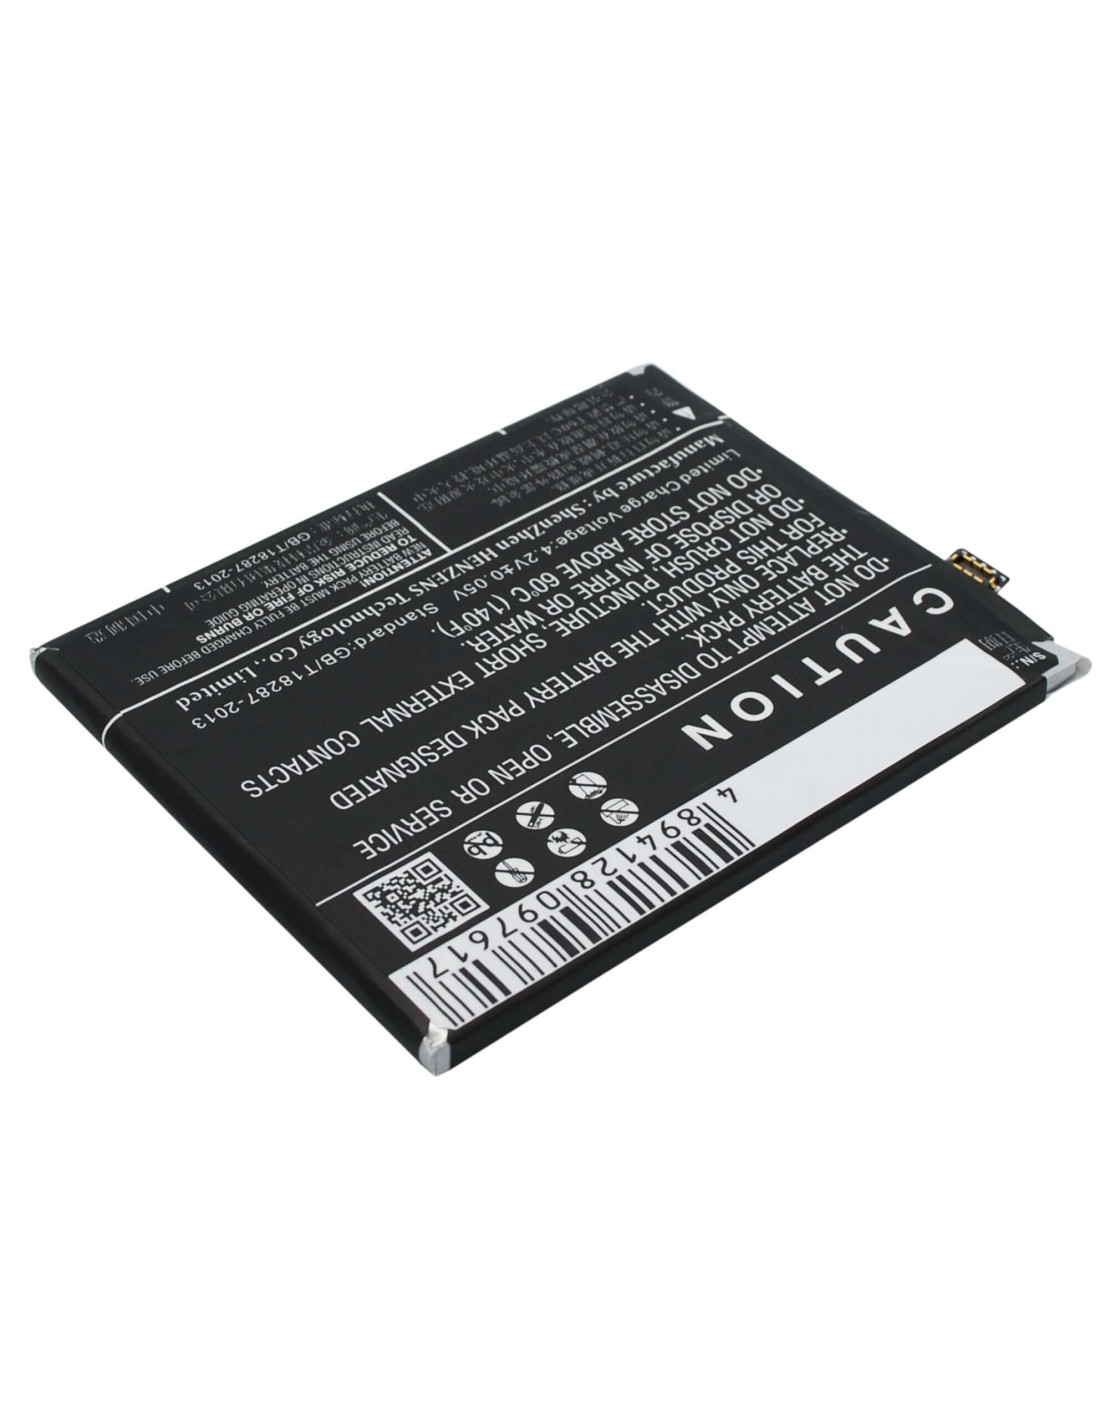 Battery for MeiZu M1, Note 3.8V, 3100mAh - 11.78Wh